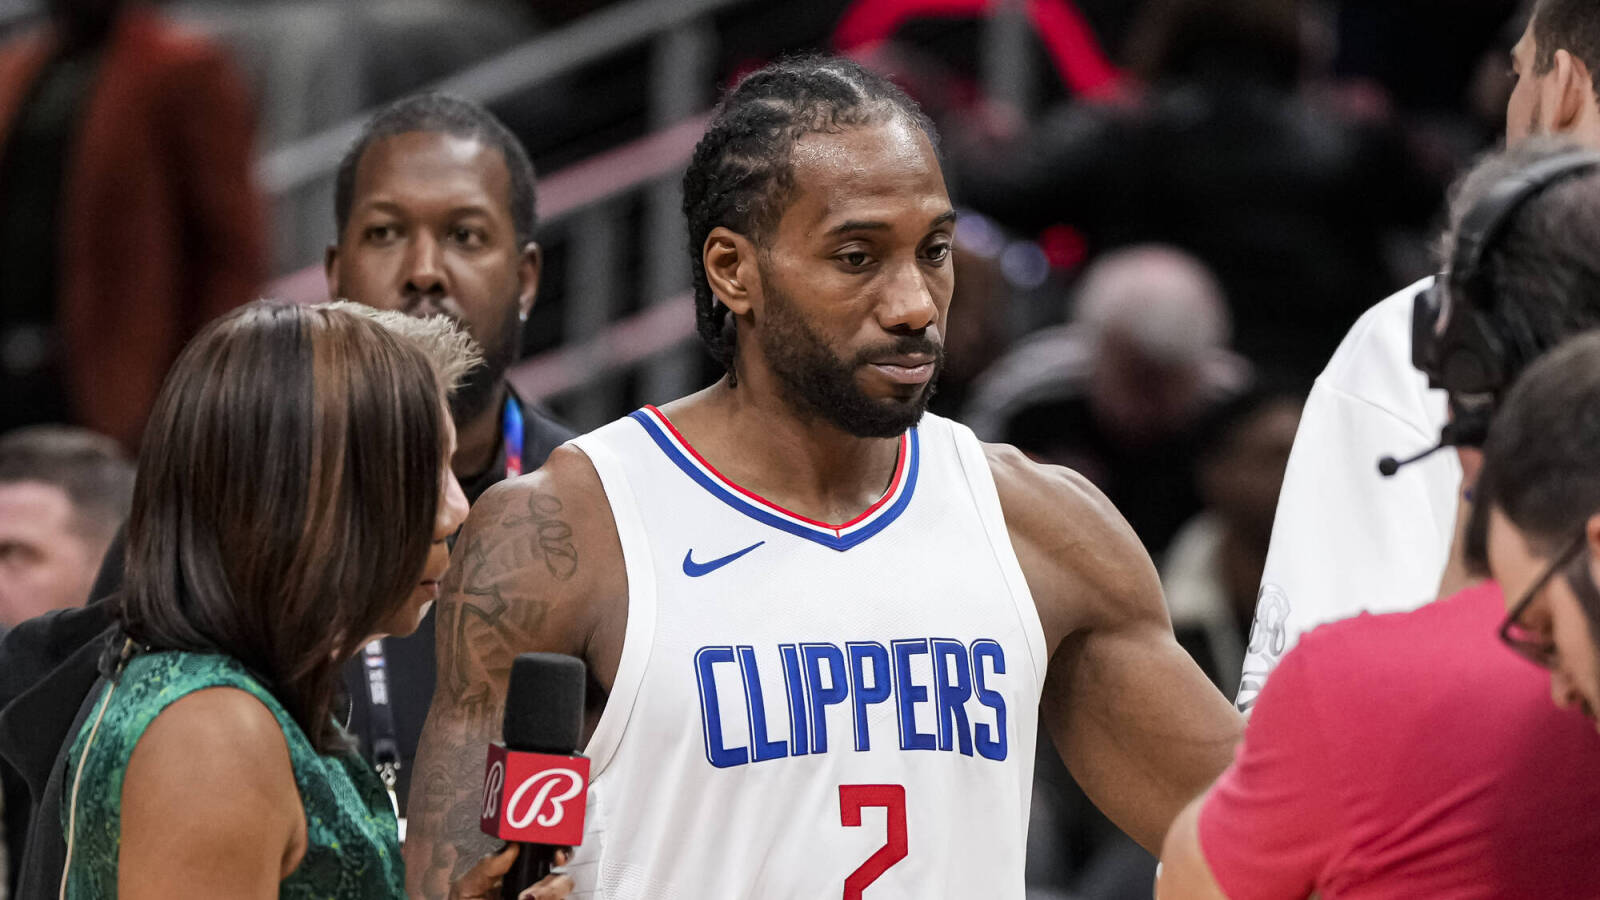 Clippers' star should be MVP candidate